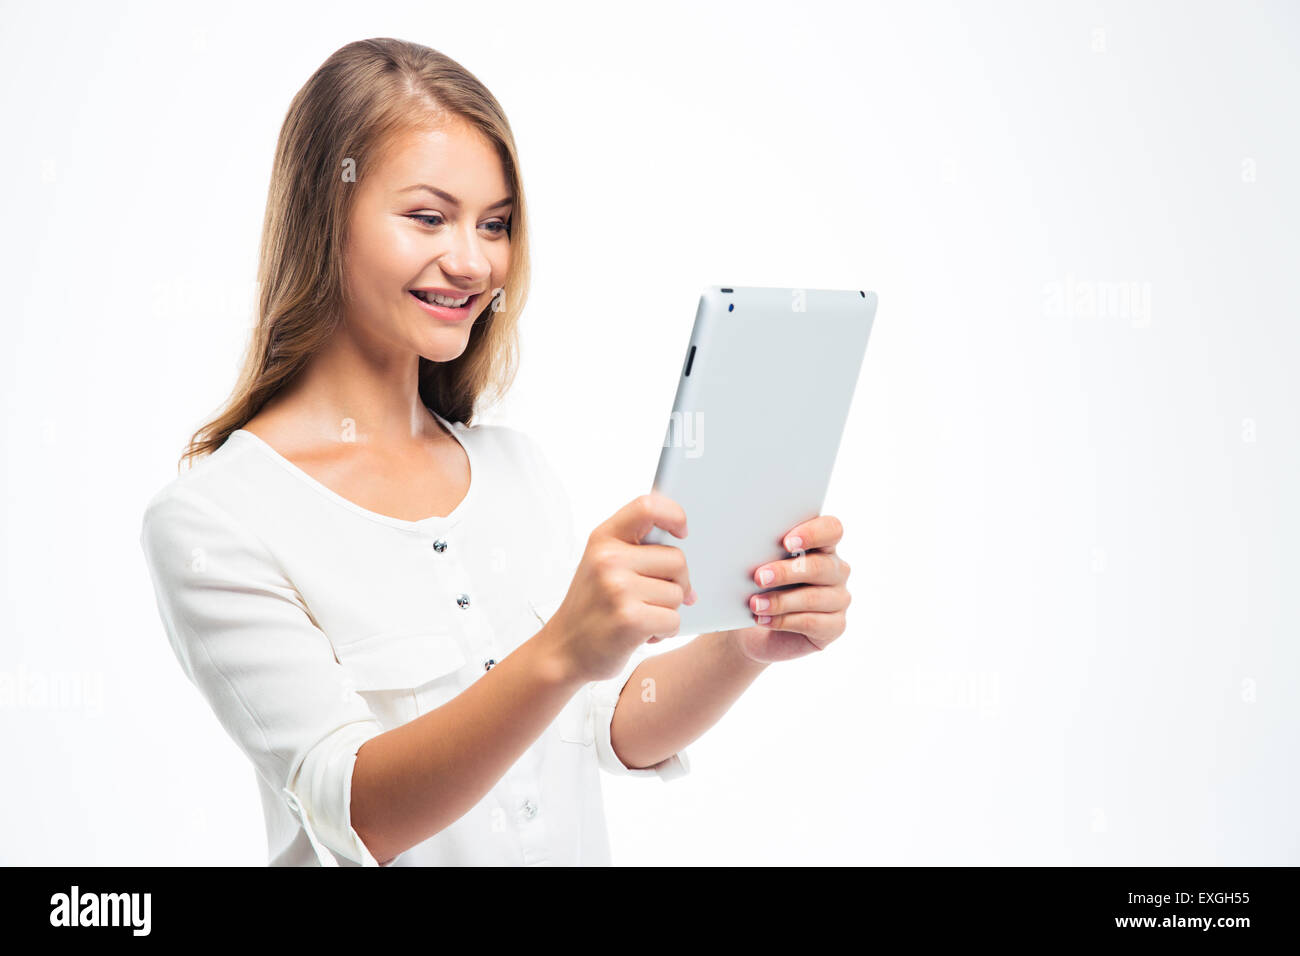 Happy young woman using tablet computer isolé sur fond blanc Banque D'Images